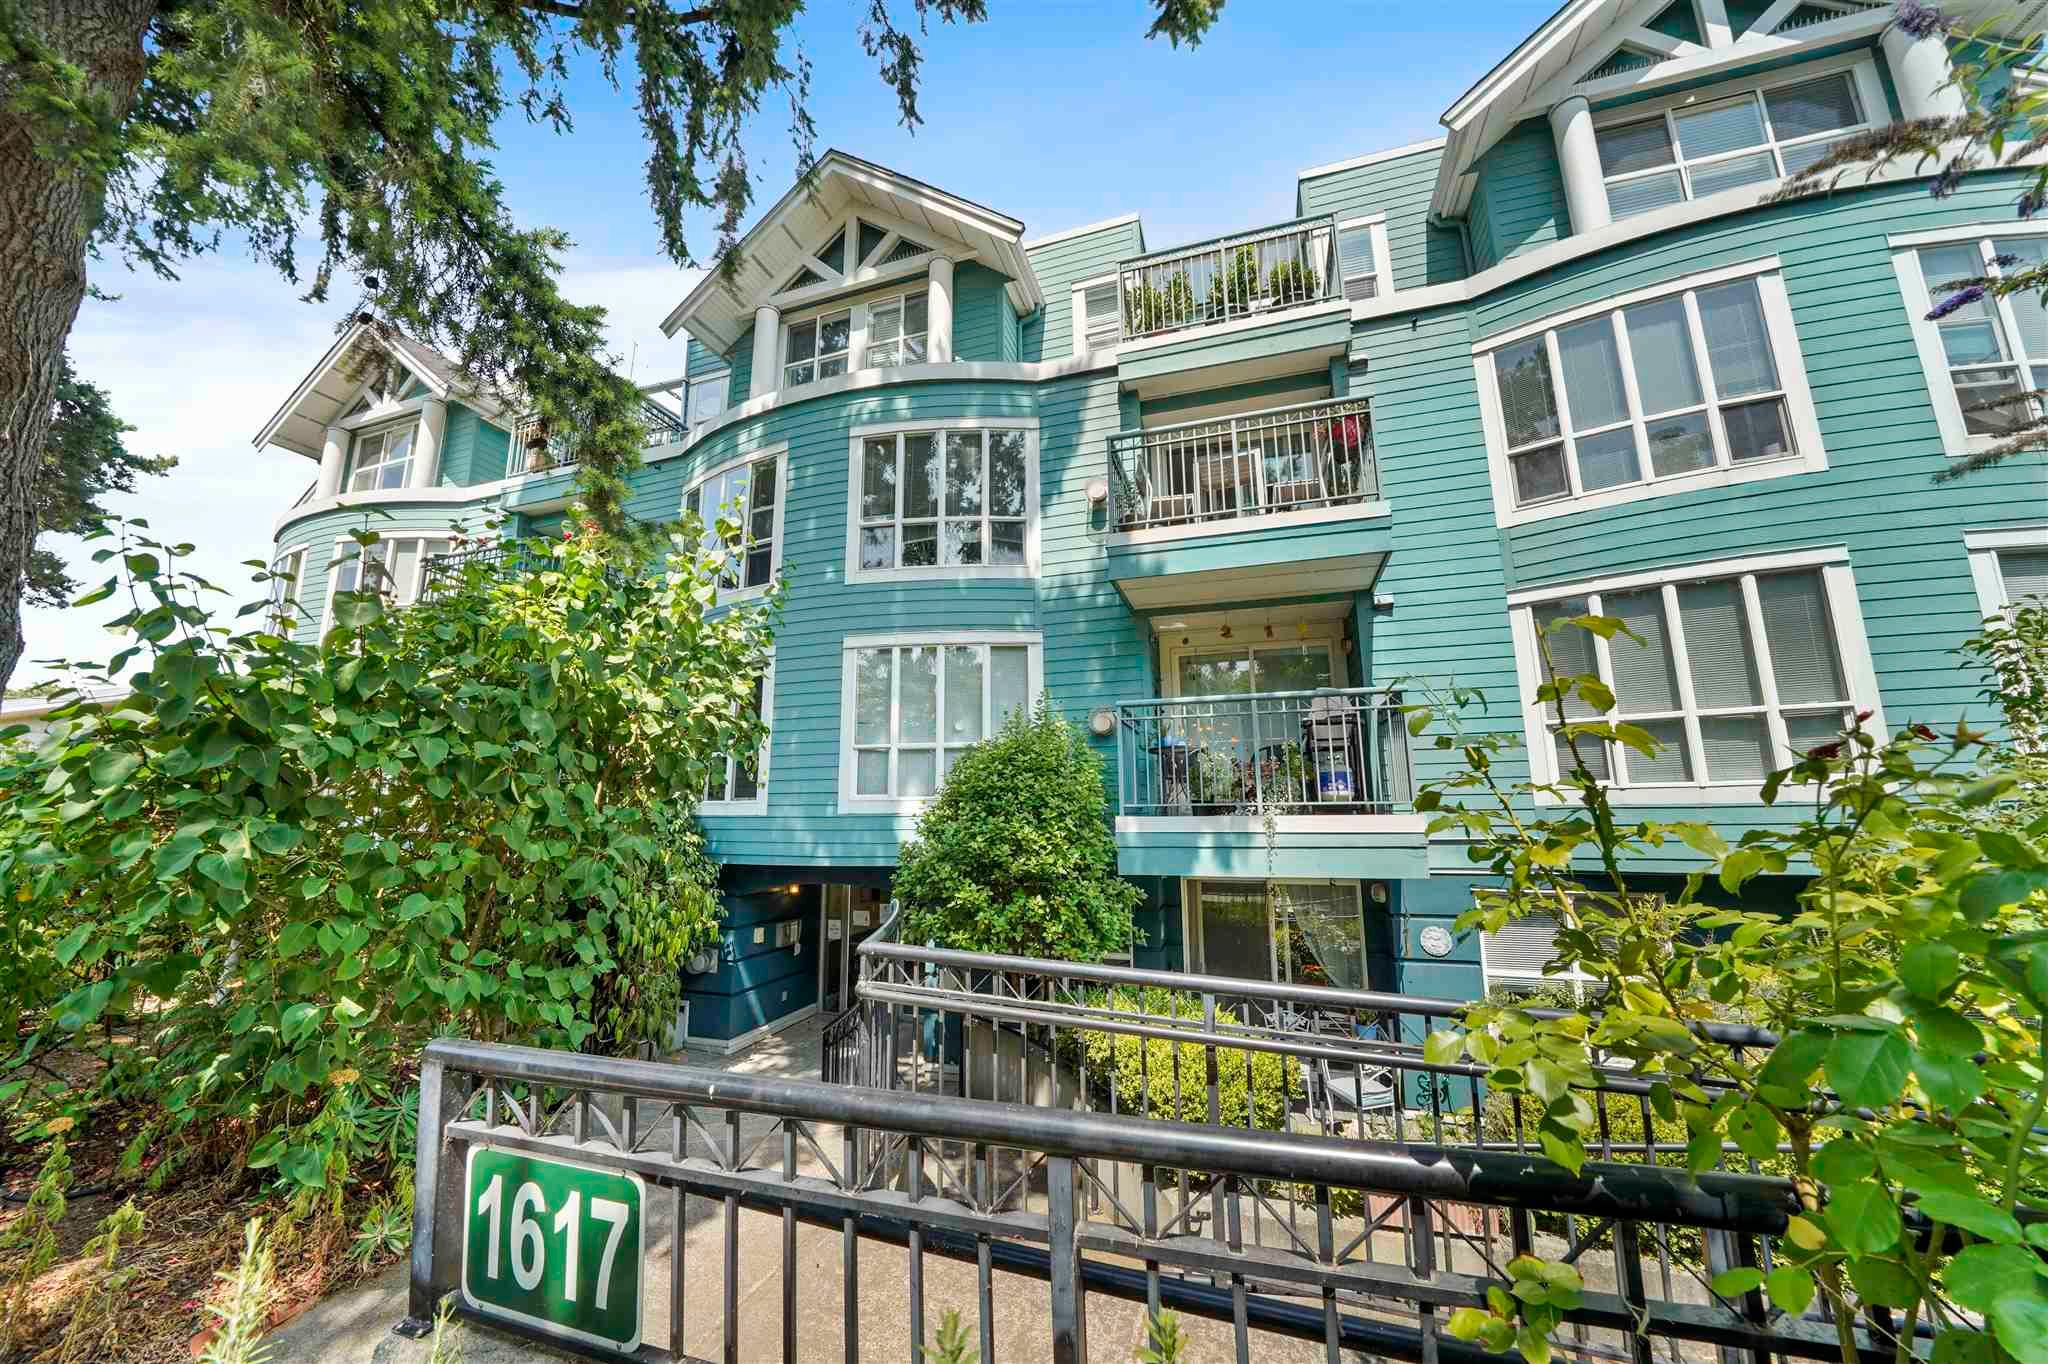 Main Photo: 204 1617 GRANT STREET in Vancouver: Grandview Woodland Condo for sale (Vancouver East)  : MLS®# R2604892